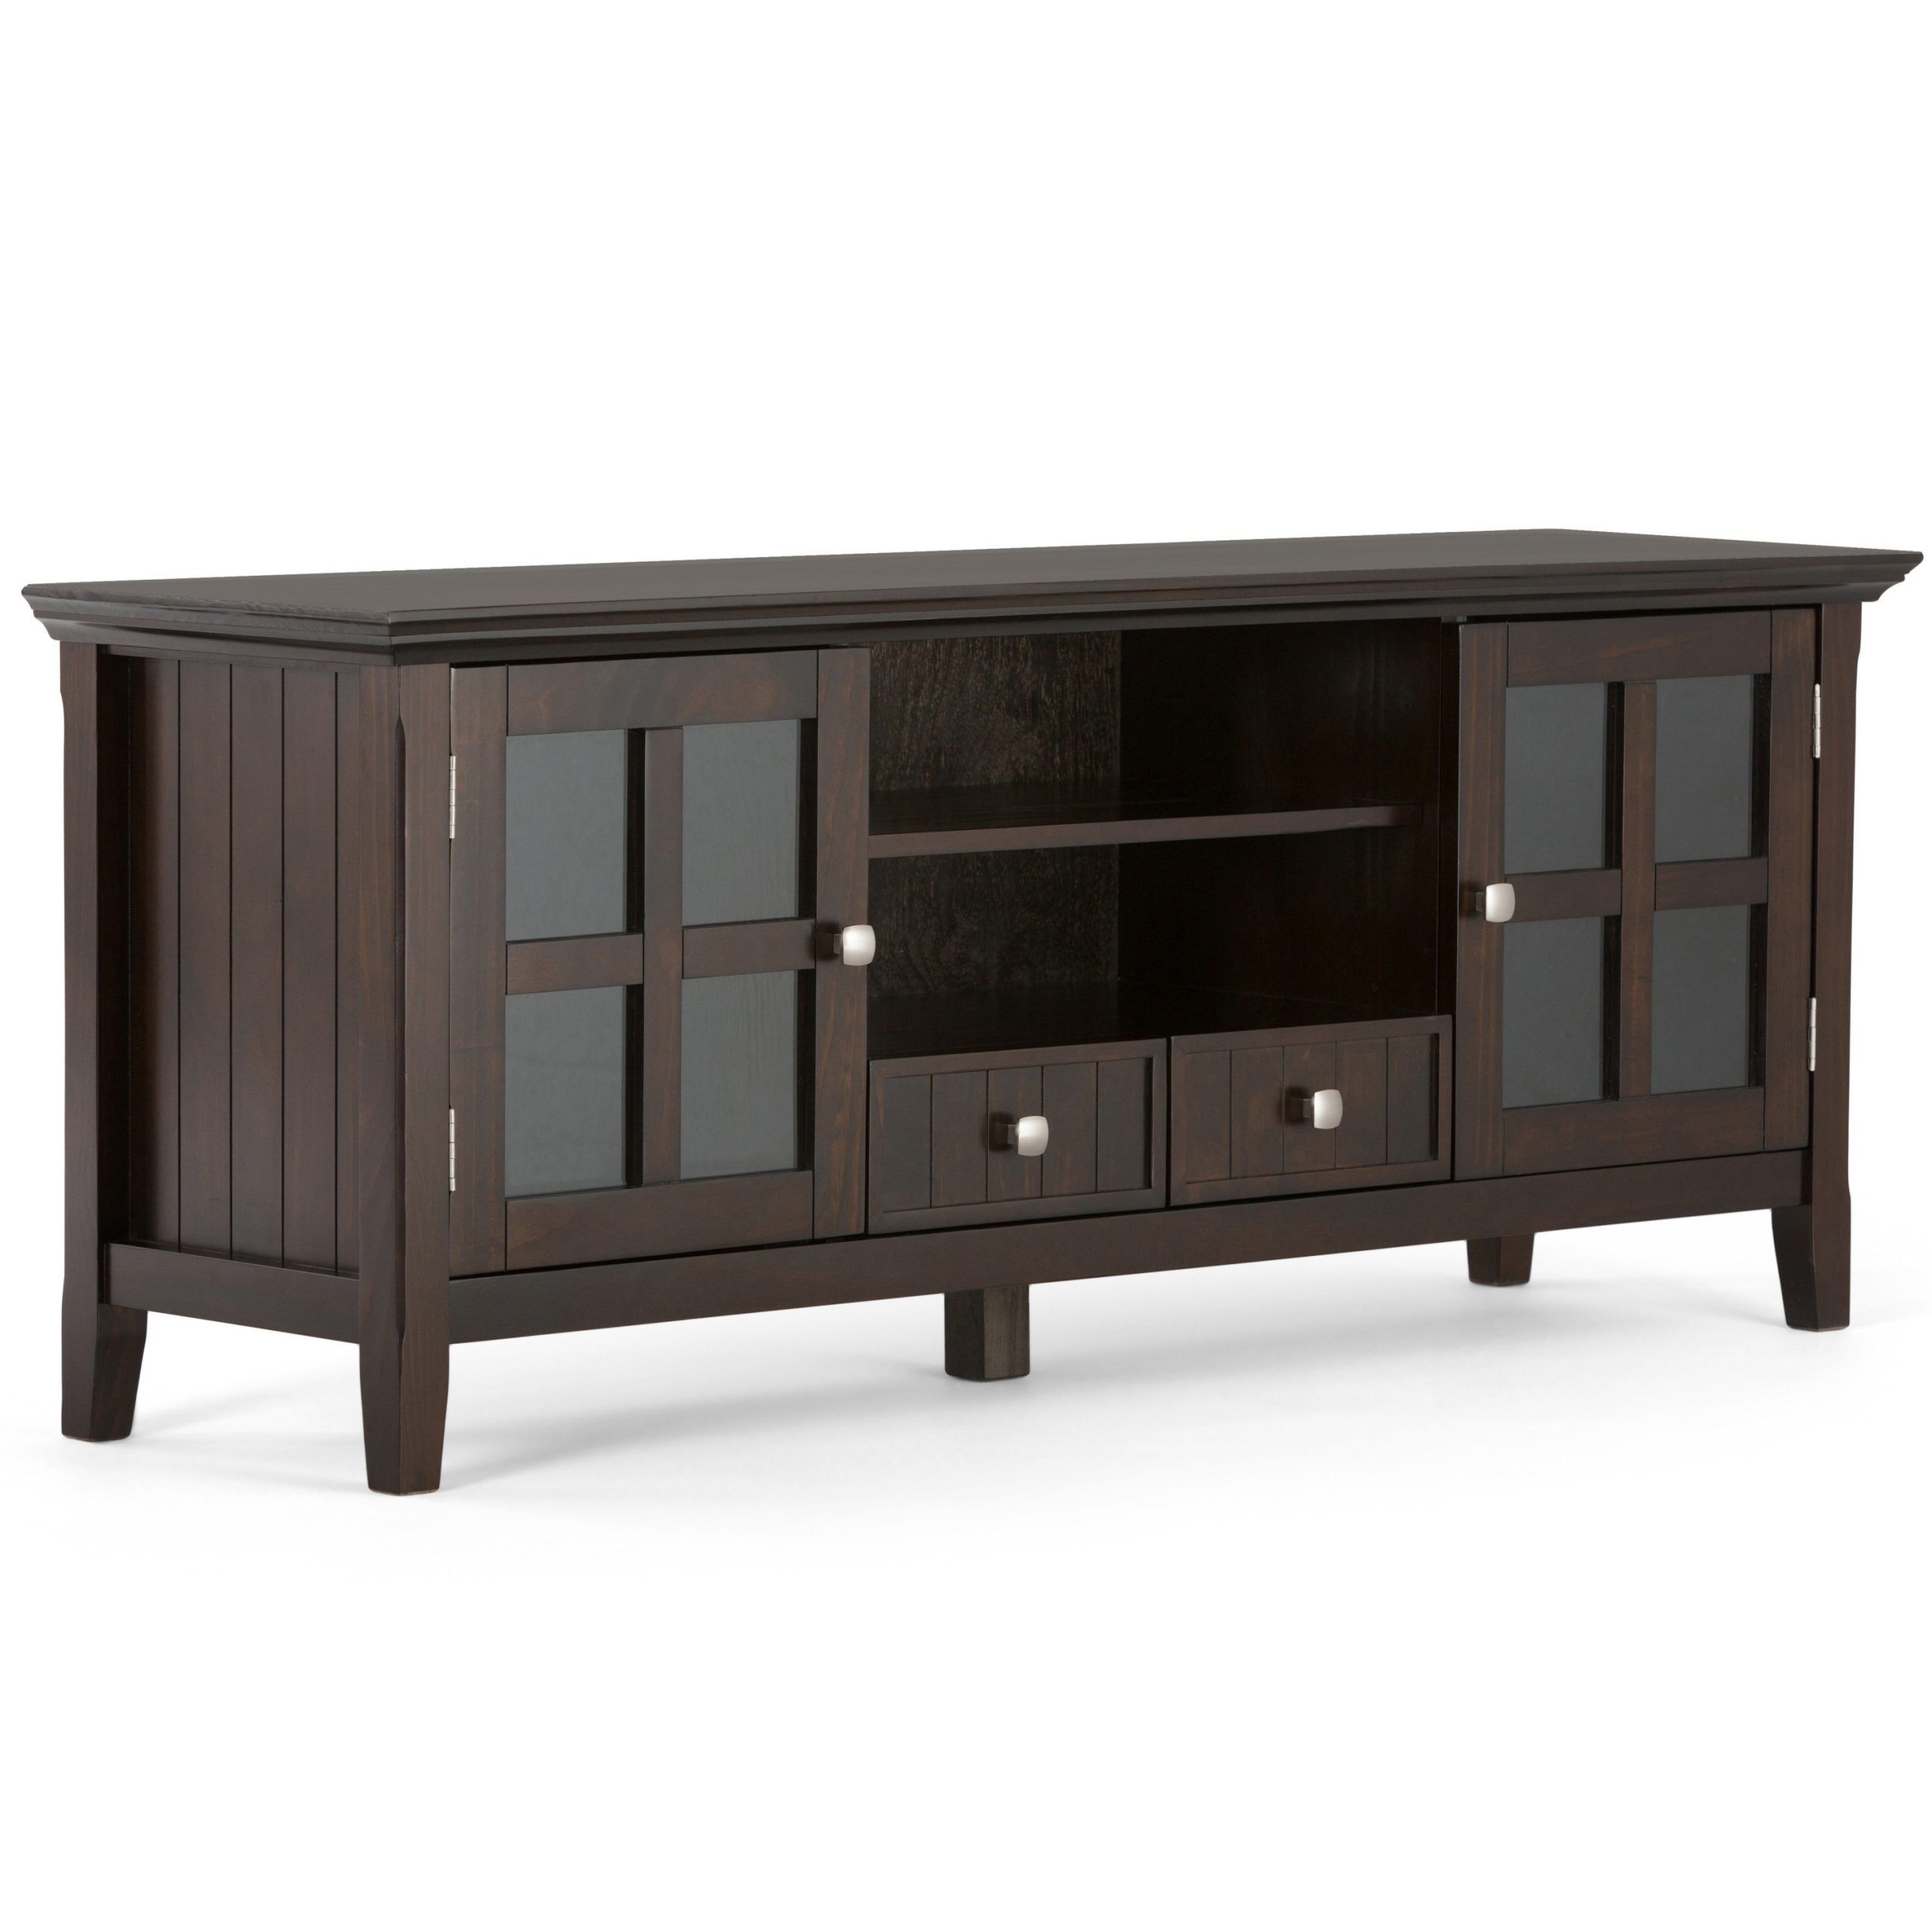 Brooklyn + Max Brunswick Solid Wood 60 Inch Wide Rustic Tv Inside Bromley Extra Wide Oak Tv Stands (Gallery 4 of 20)